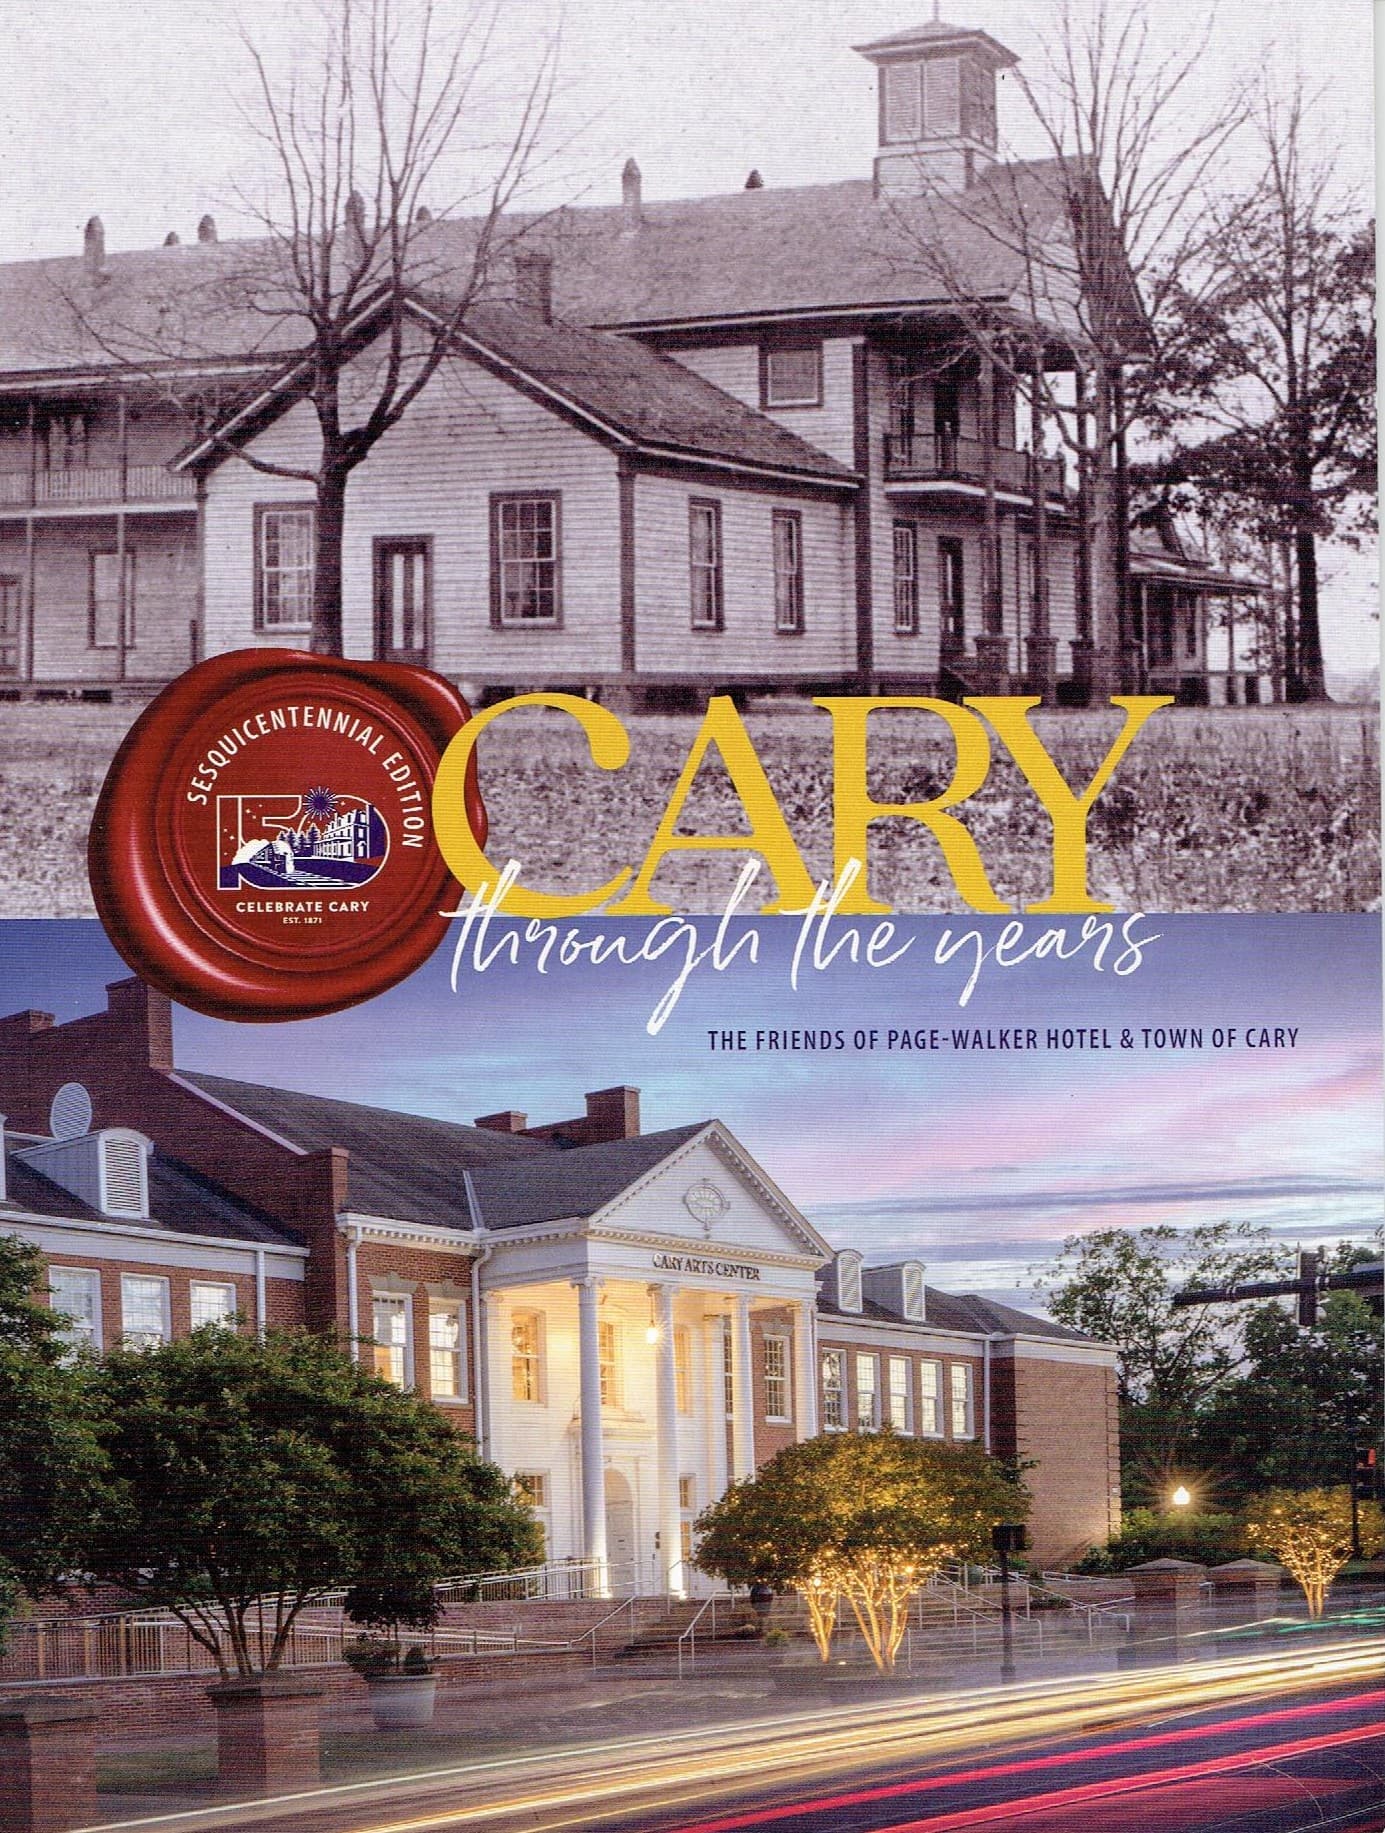 Courtesy of The Friends of Page-Walker Hotel & Town of Cary | HDIngles.com